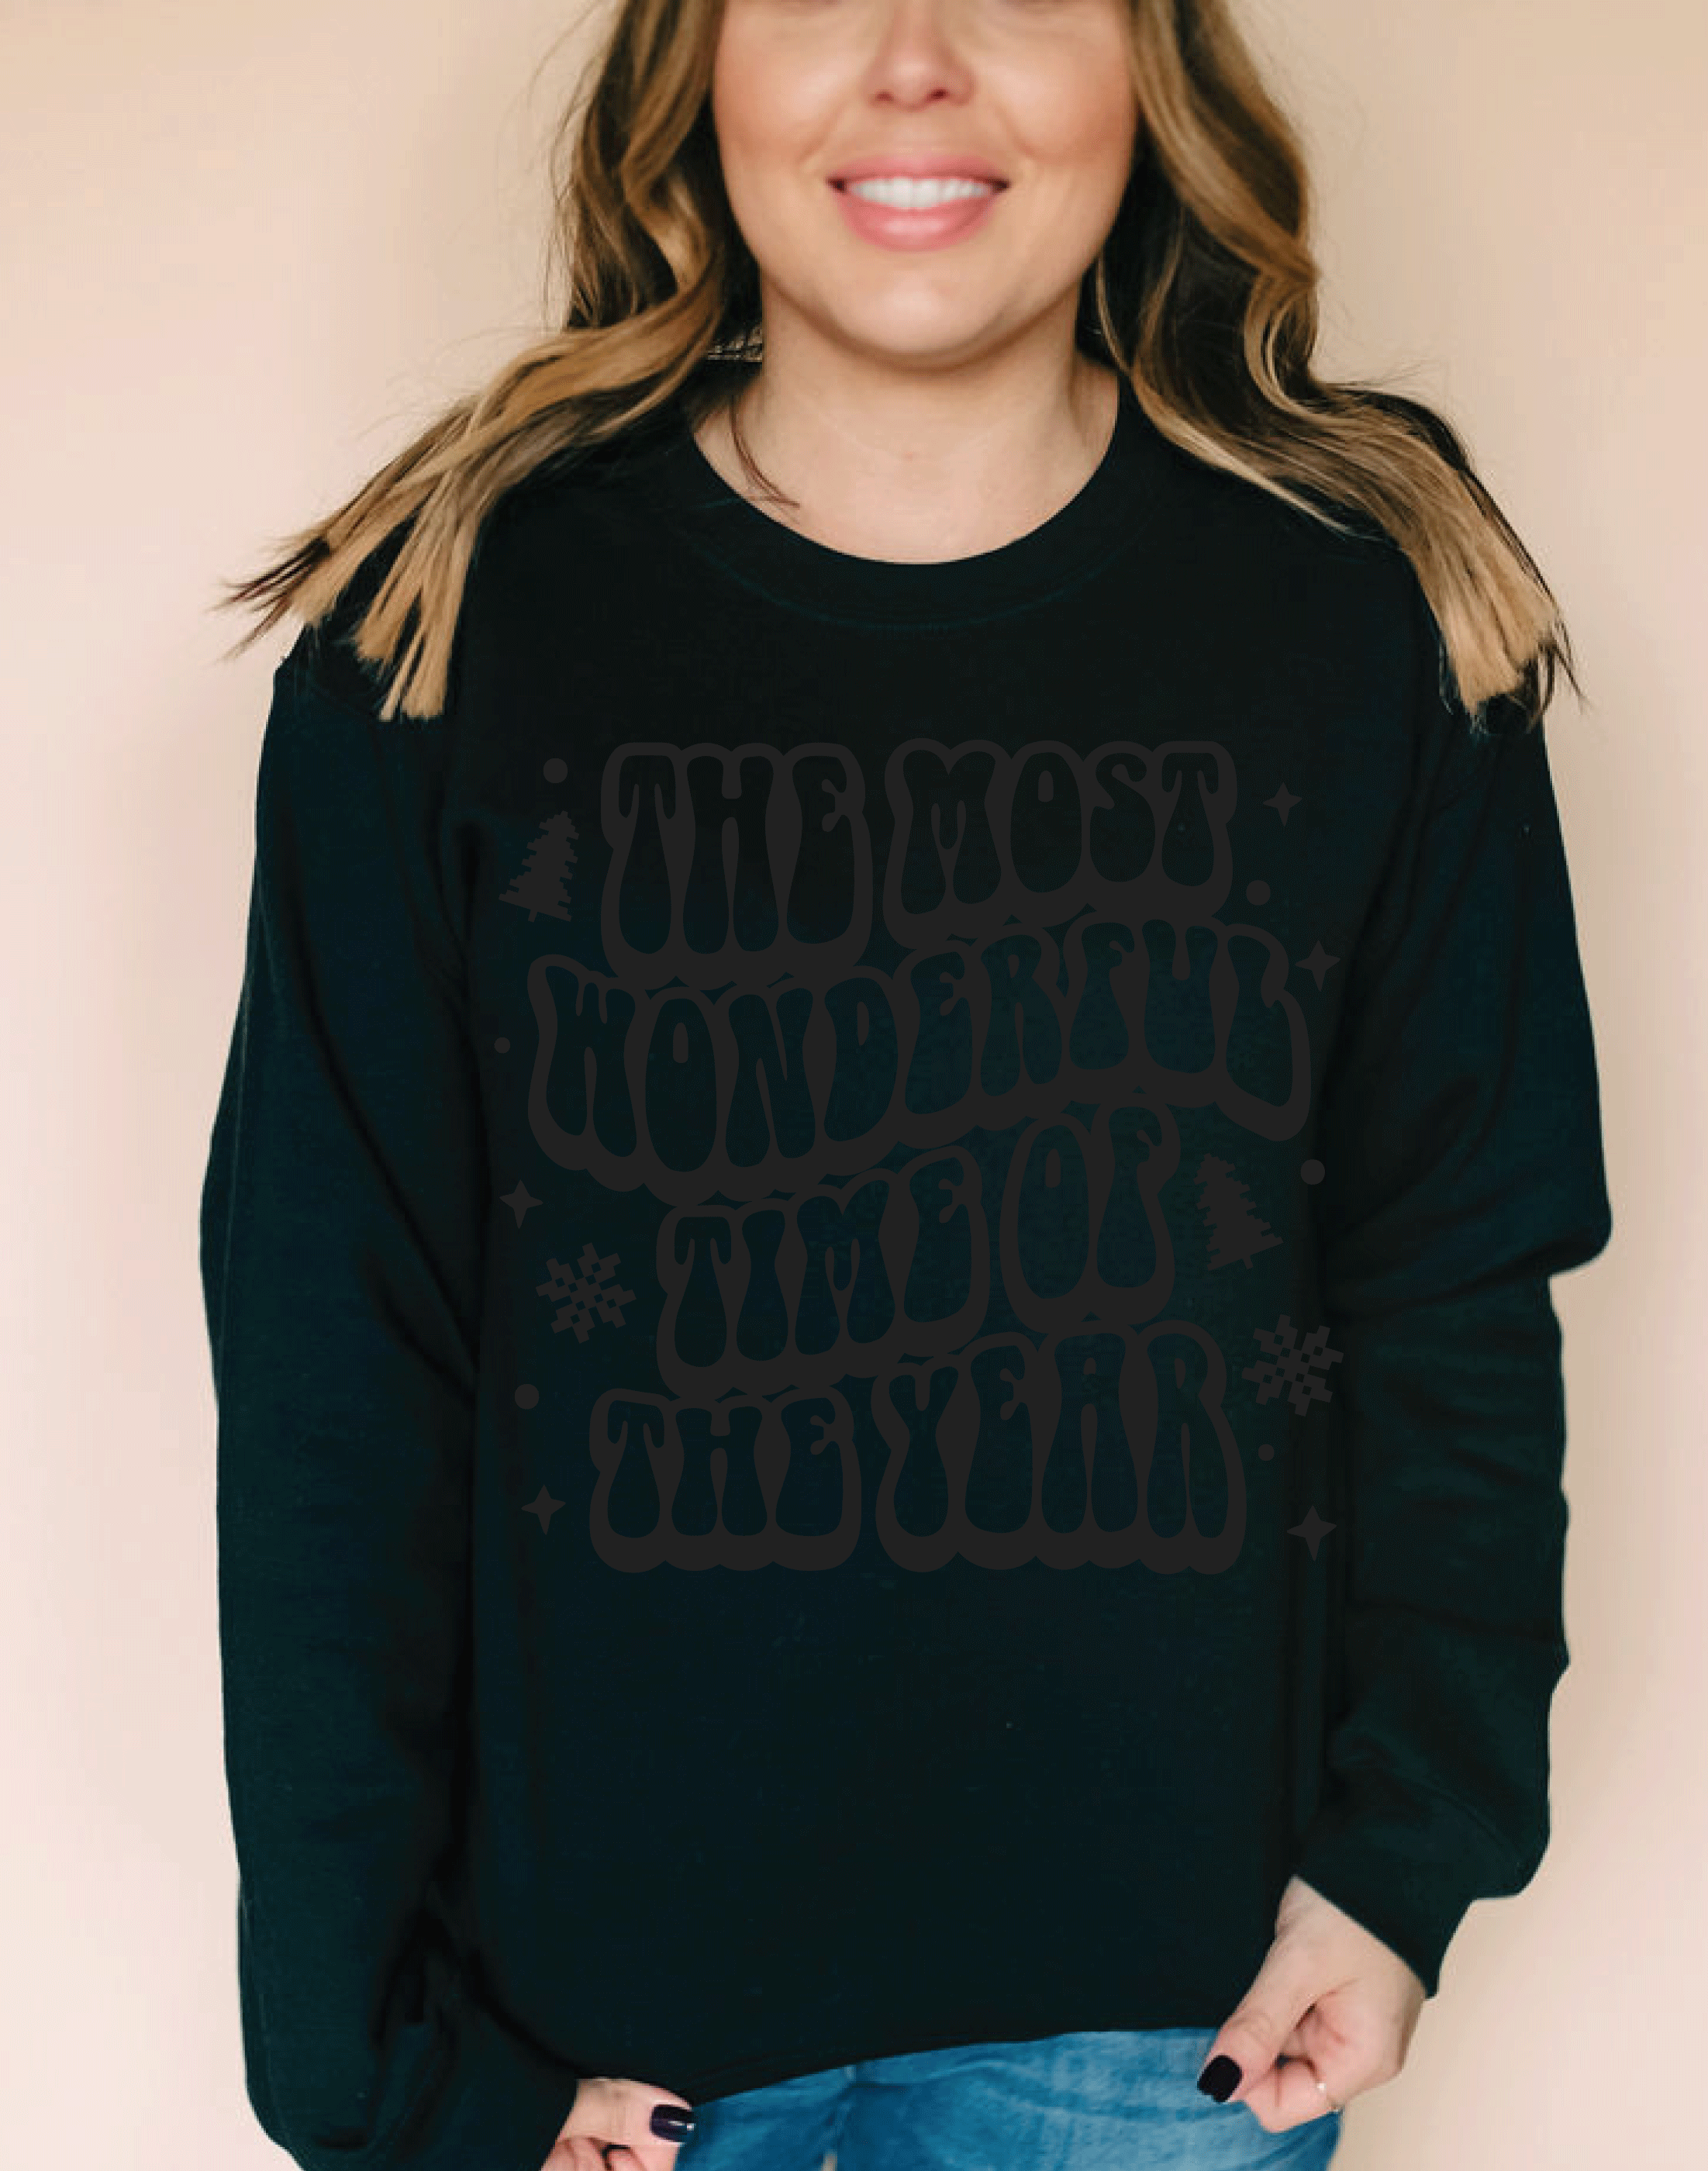 Most Wonderful Time of the Year || Adult Pullover